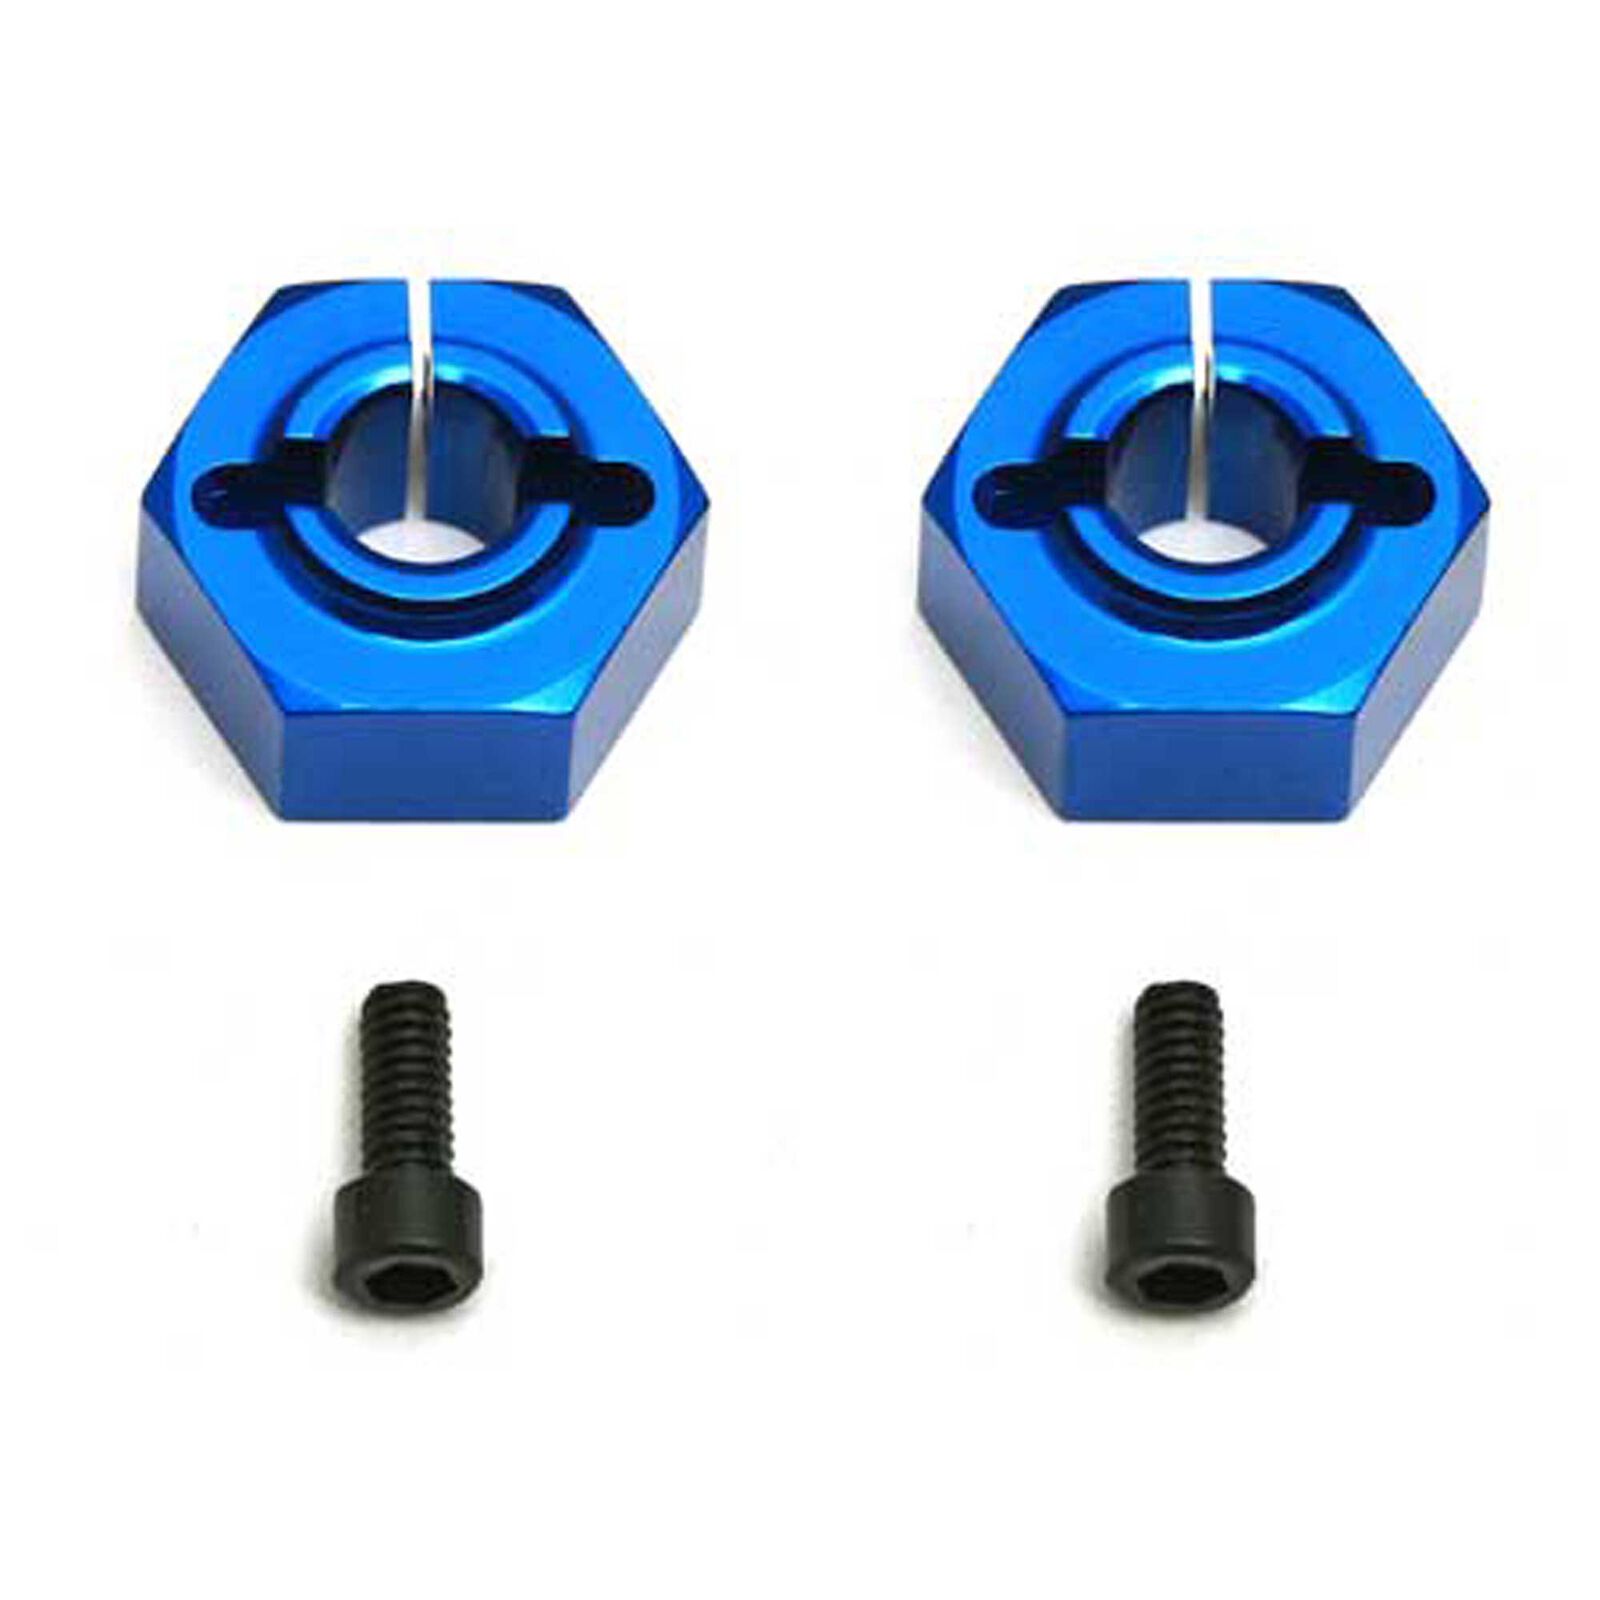 Factory Team 12mm Aluminum Clamping Wheel Hexes Buggy Rear